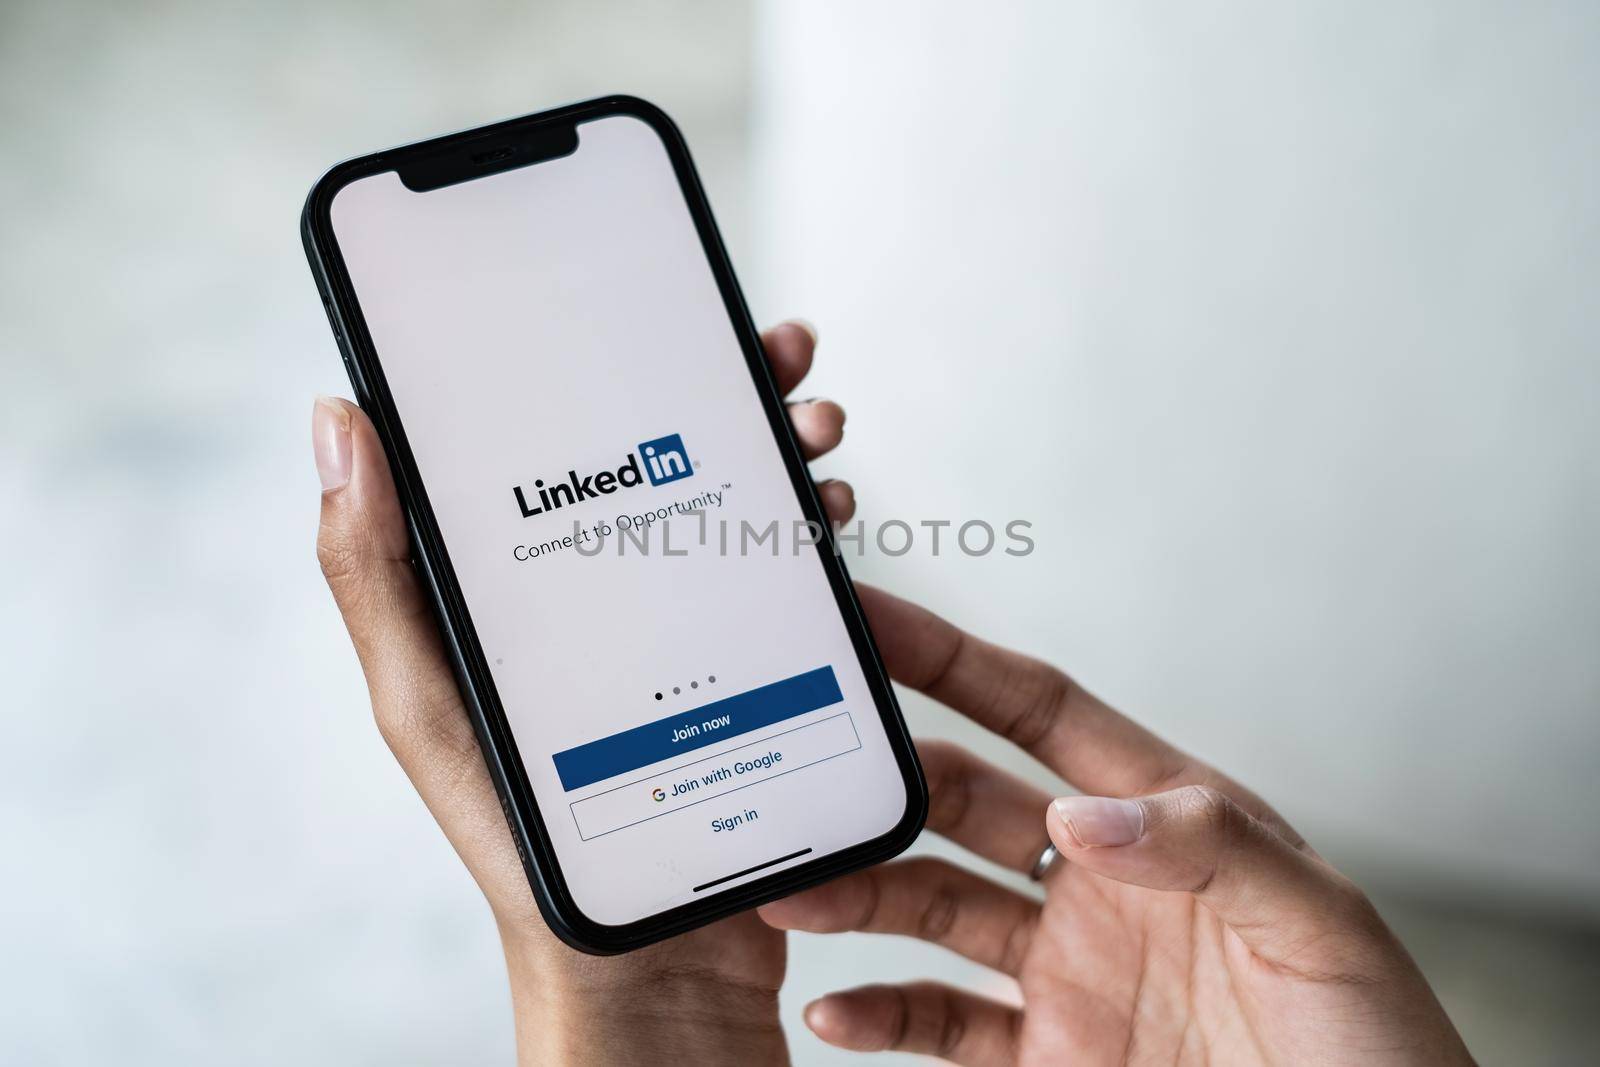 CHIANG MAI, THAILAND - JAN 15, 2022: Woman holding Phone with LinkedIn application on the screen. LinkedIn is a business-oriented social networking